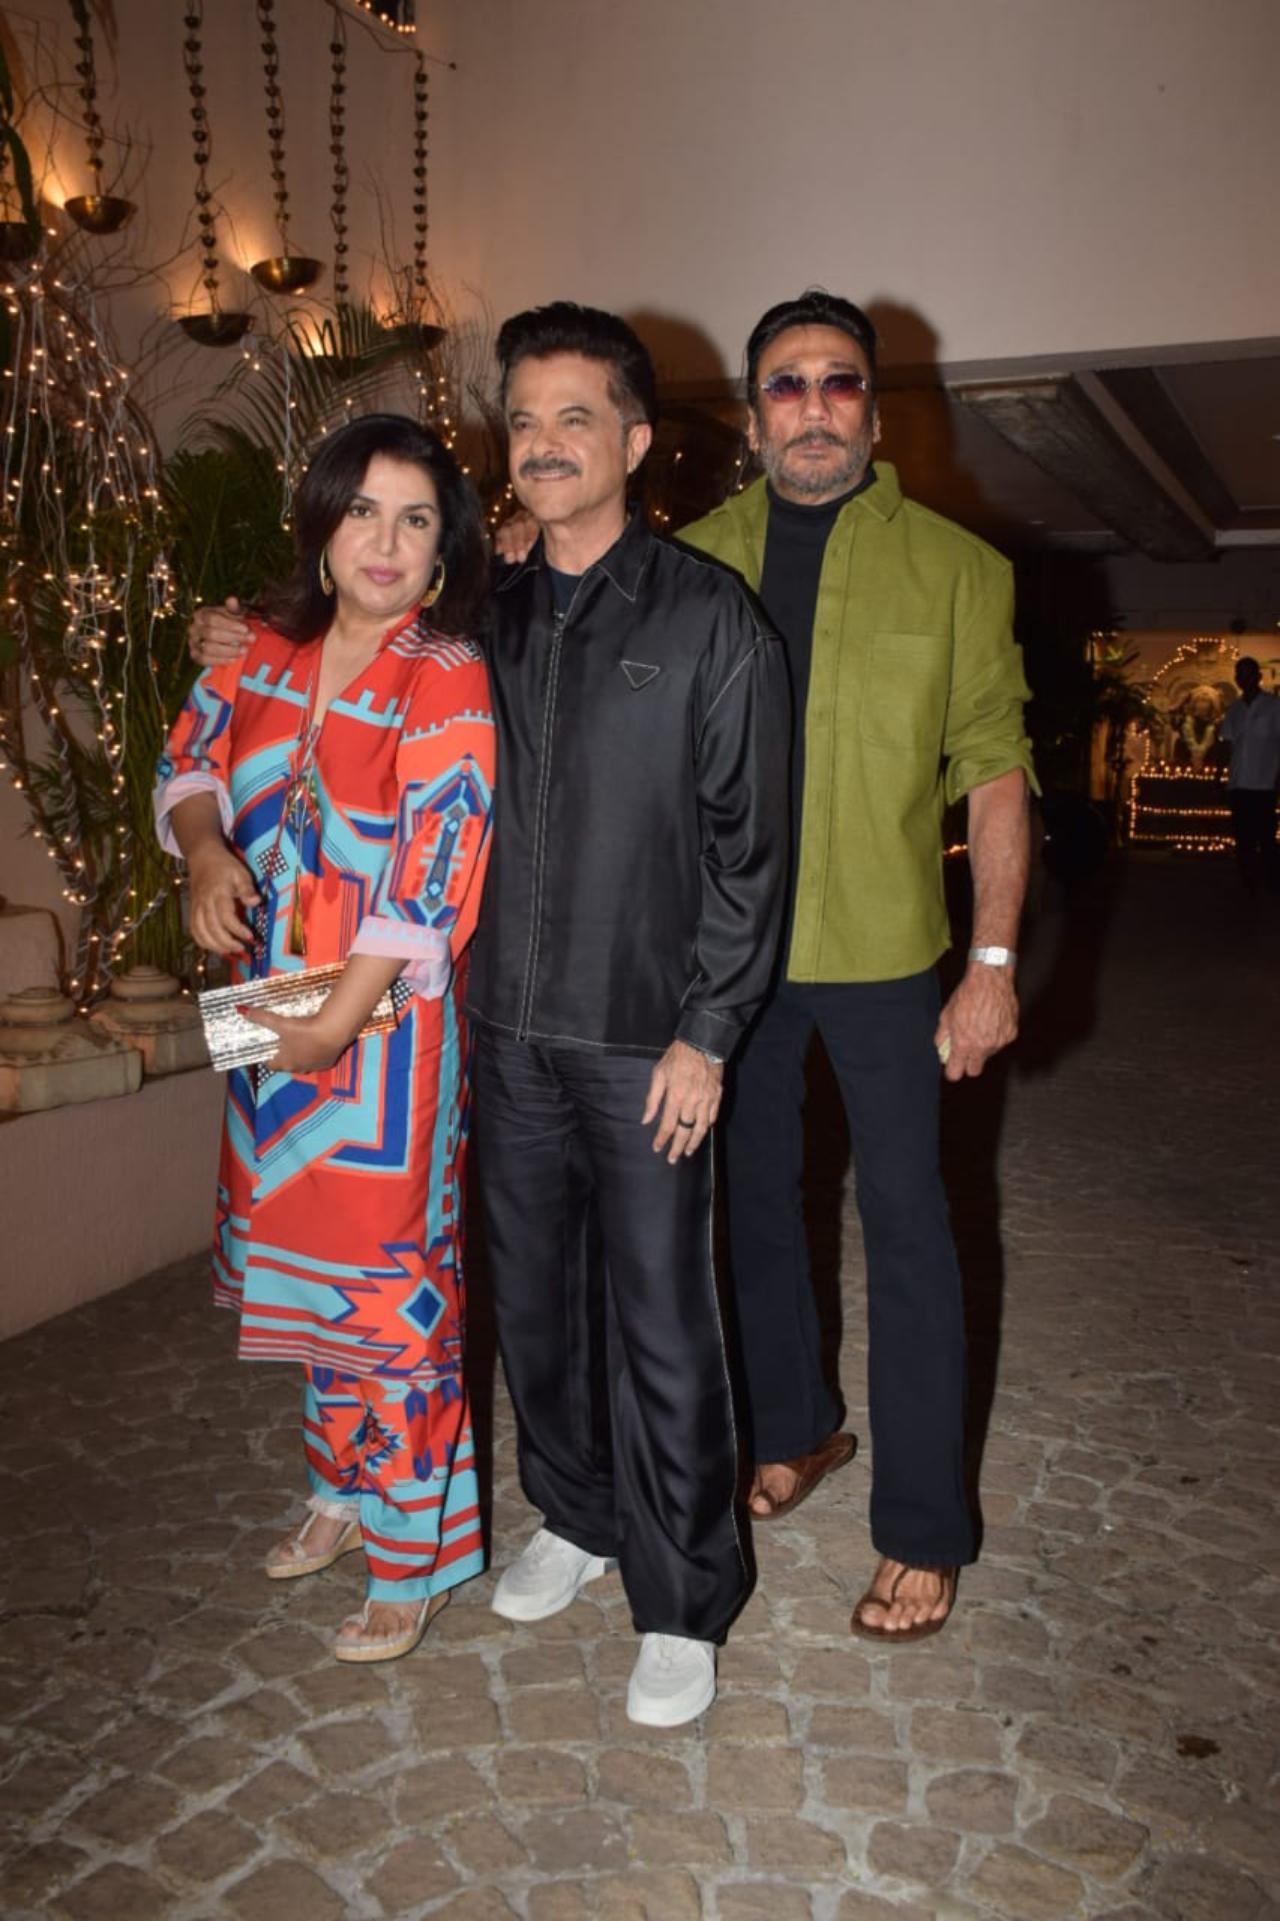 Bollywood director and choreographer Farah Khan was spotted posing along with the birthday boy Anil Kapoor and Jackie Shroff in front of the paps. The ‘Happy New Year’ director donned an orange and blue colored suit